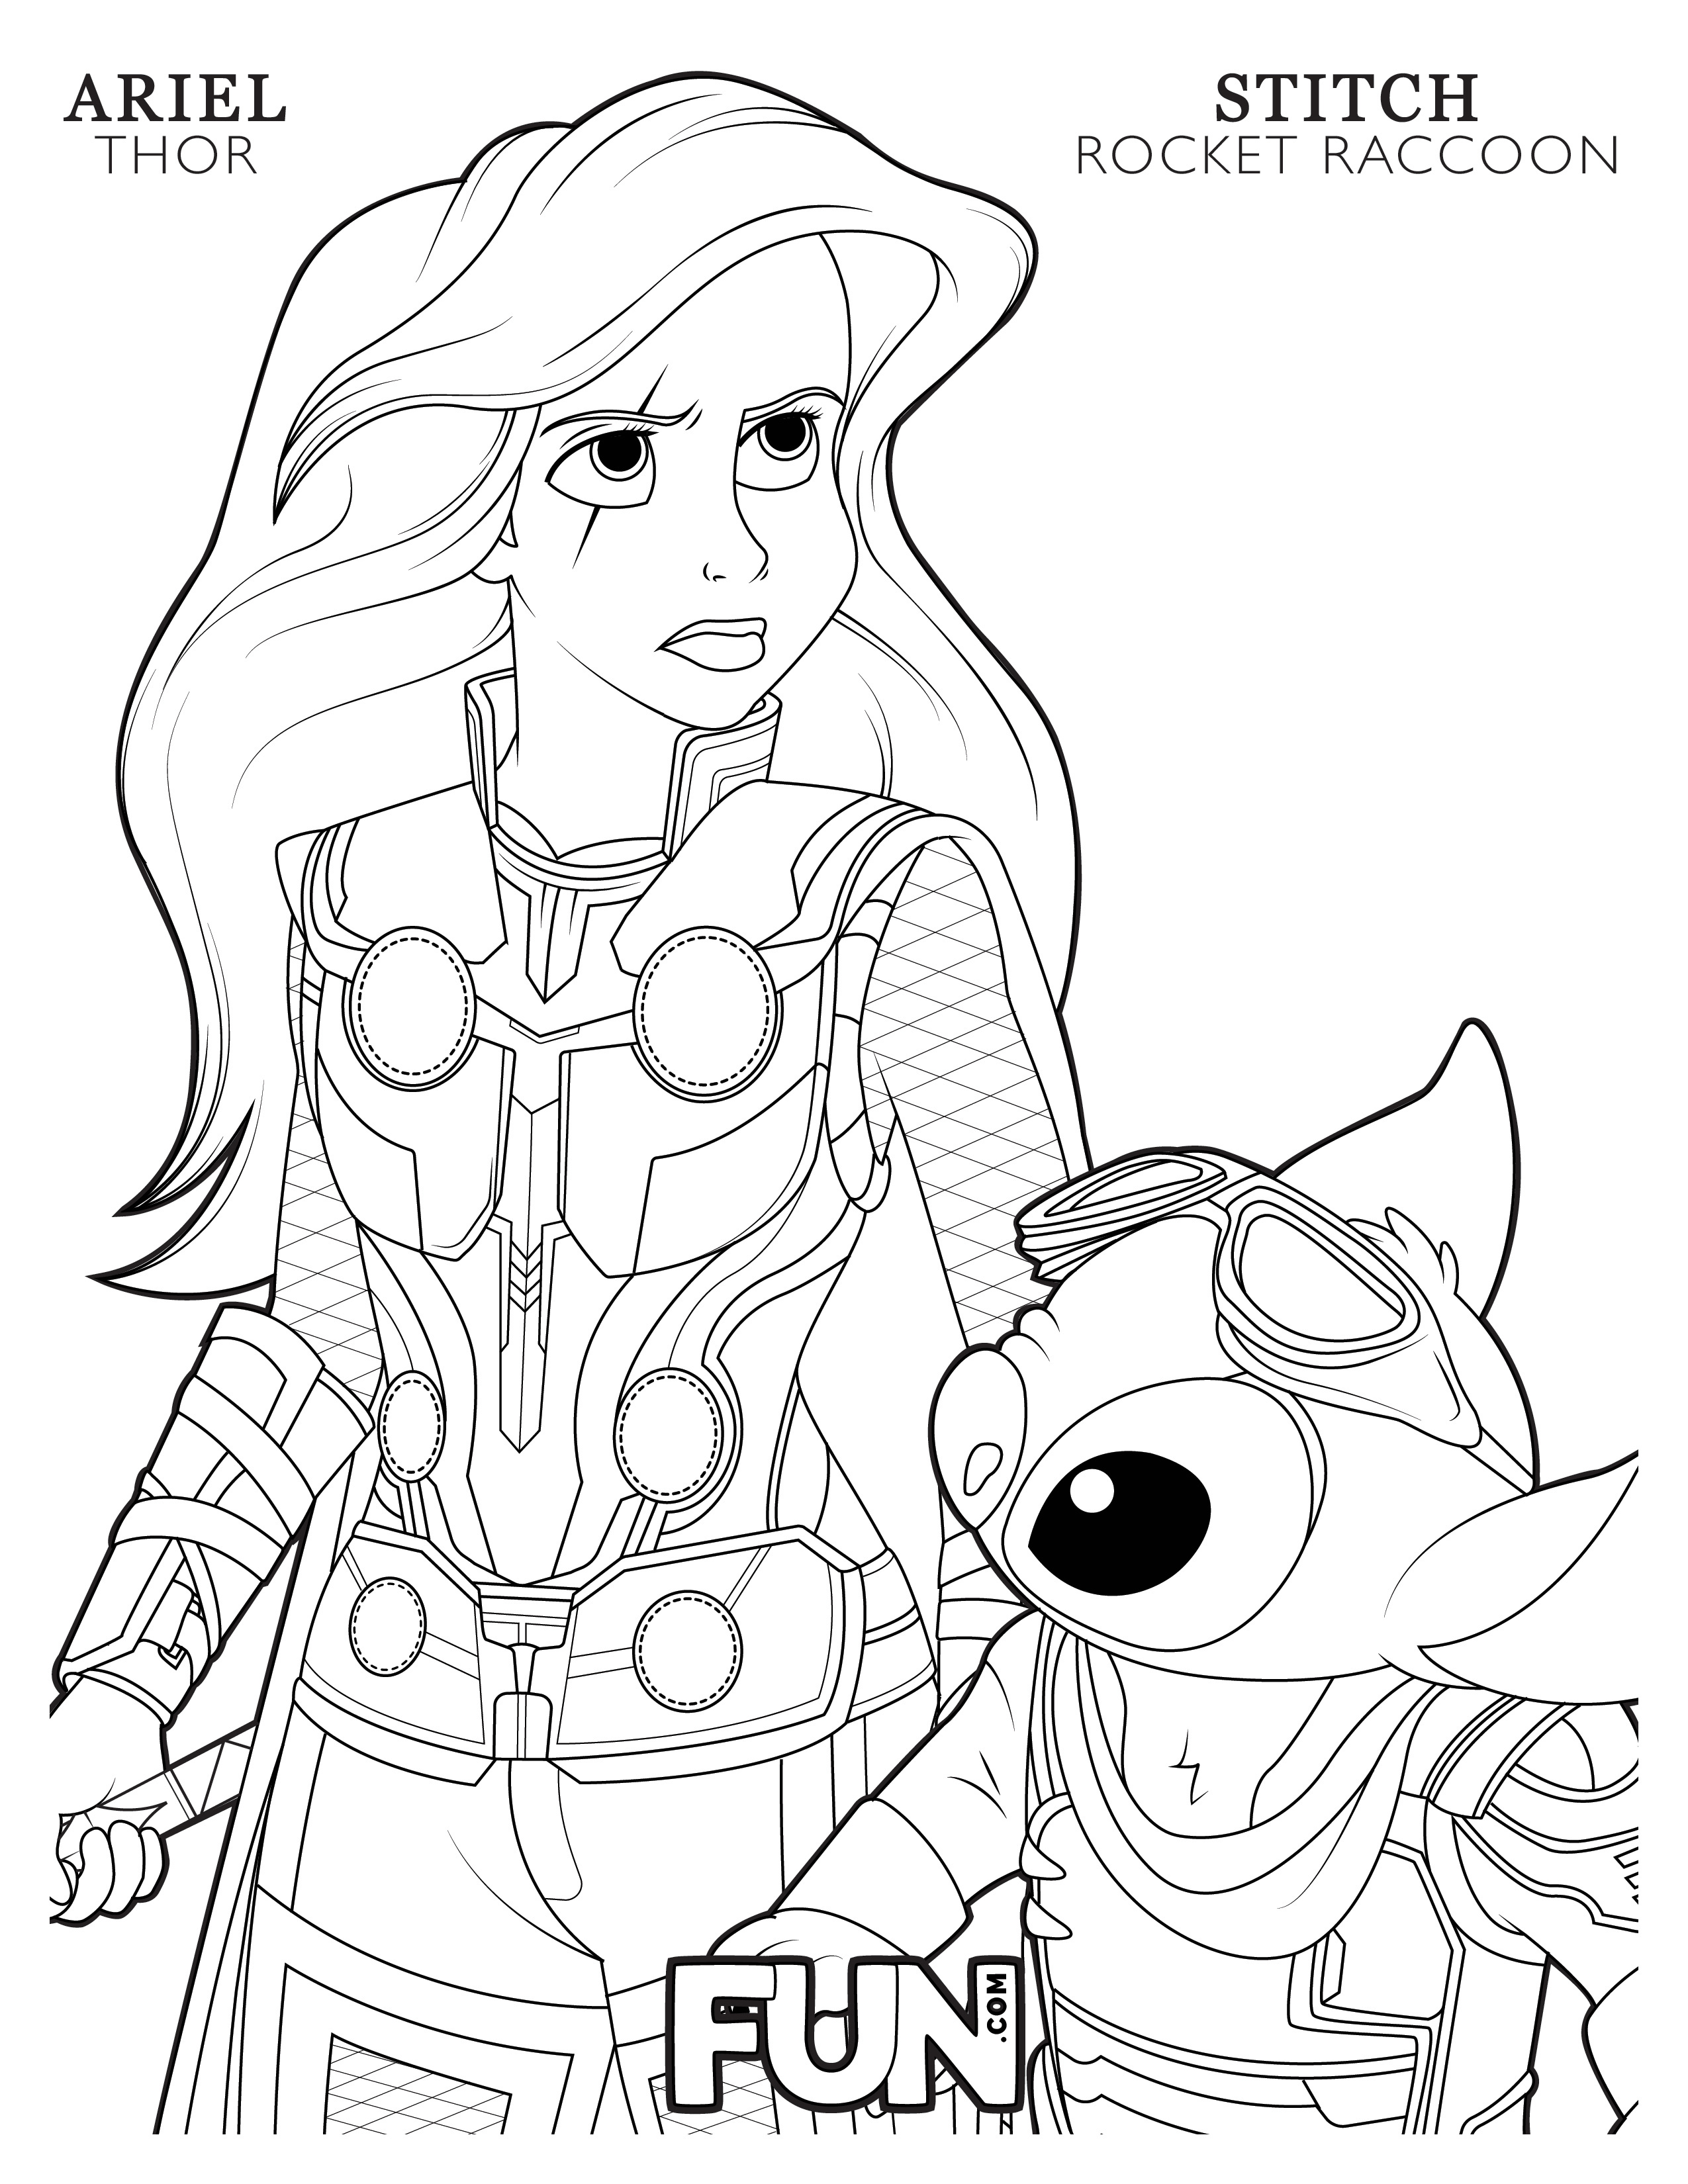 Ariel Thor and Stitch Rocket Raccoon Coloring Page